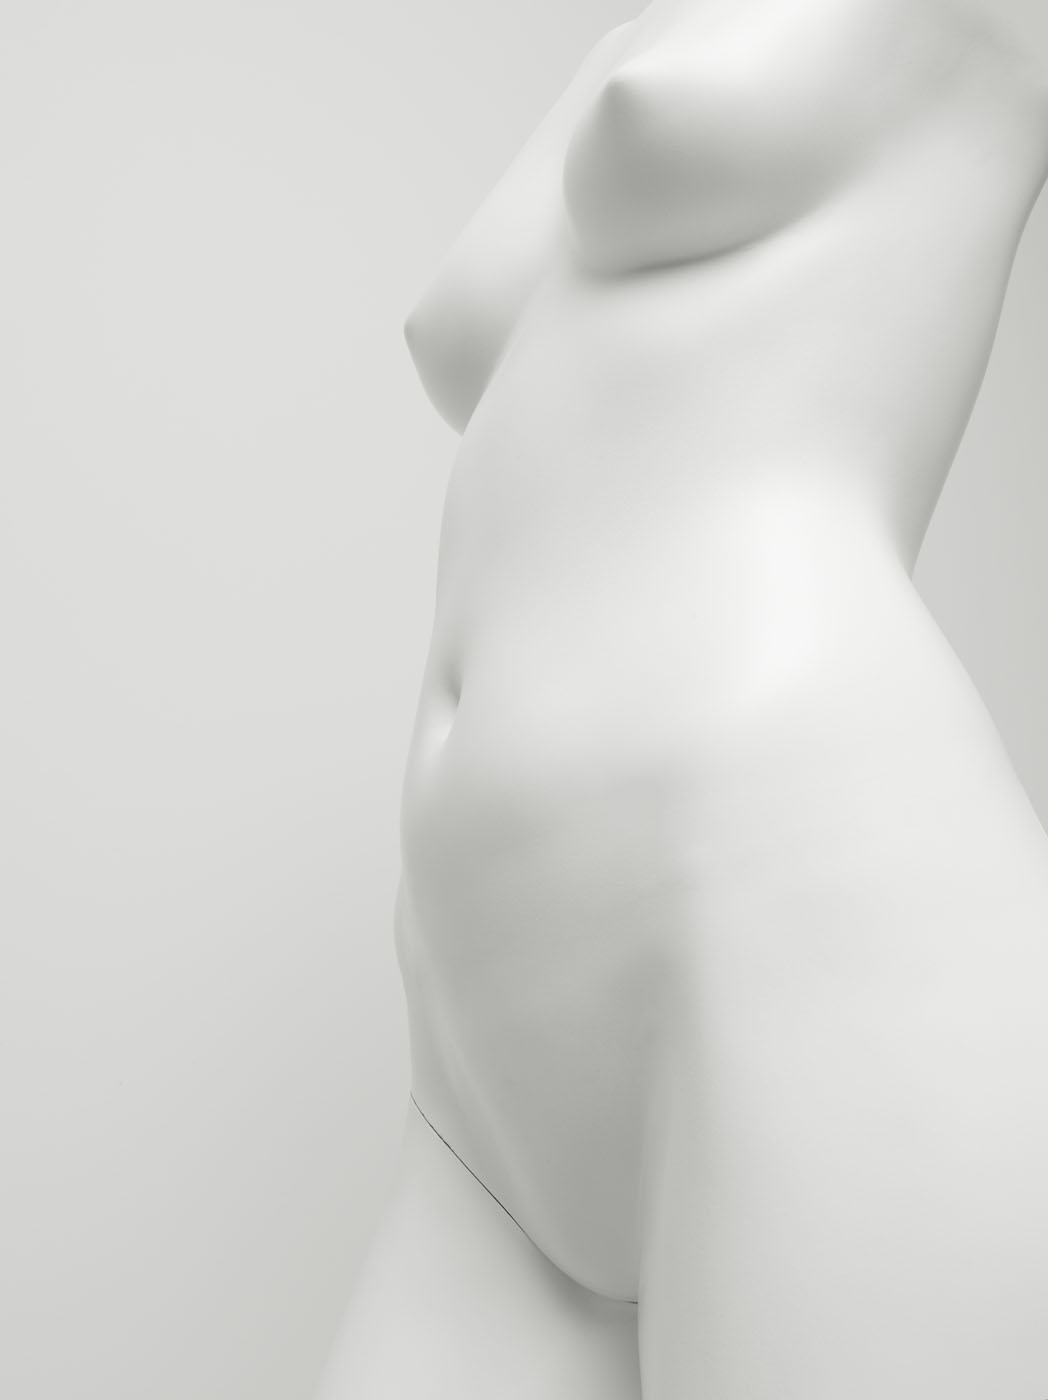 Nude photo of torso by Alexander Kent London based still life and product photographer.